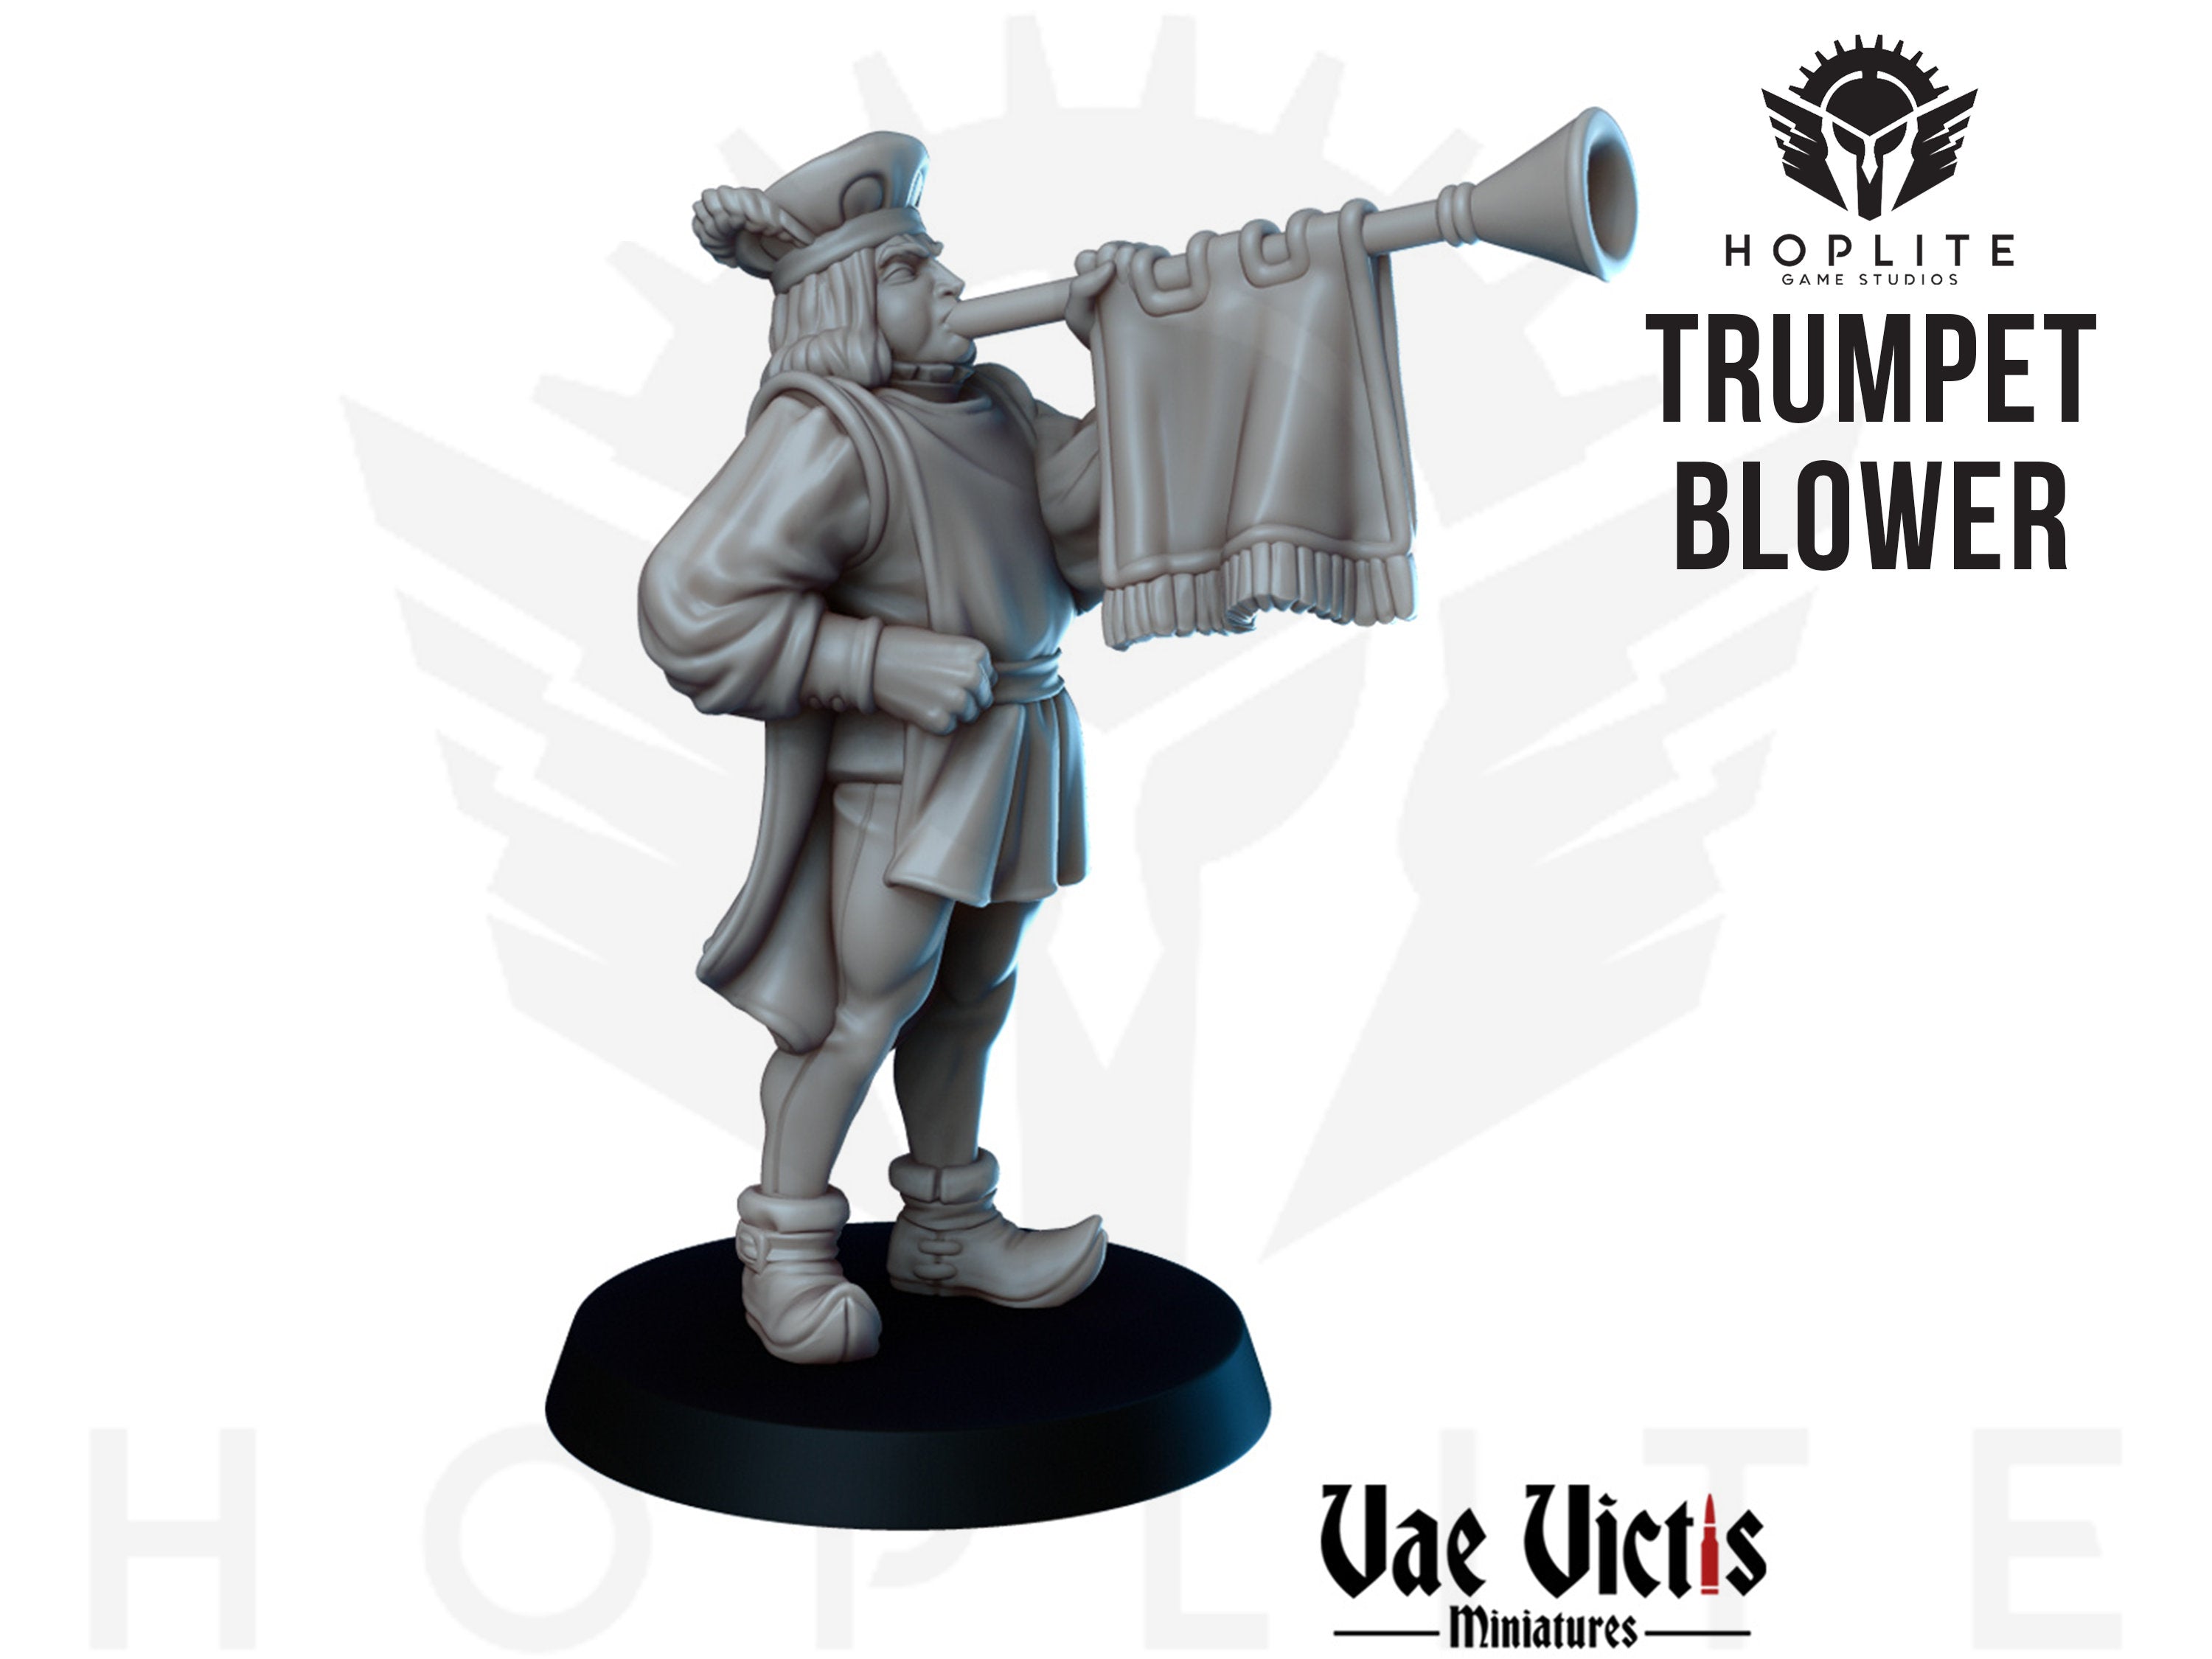 The Trumpet Blower